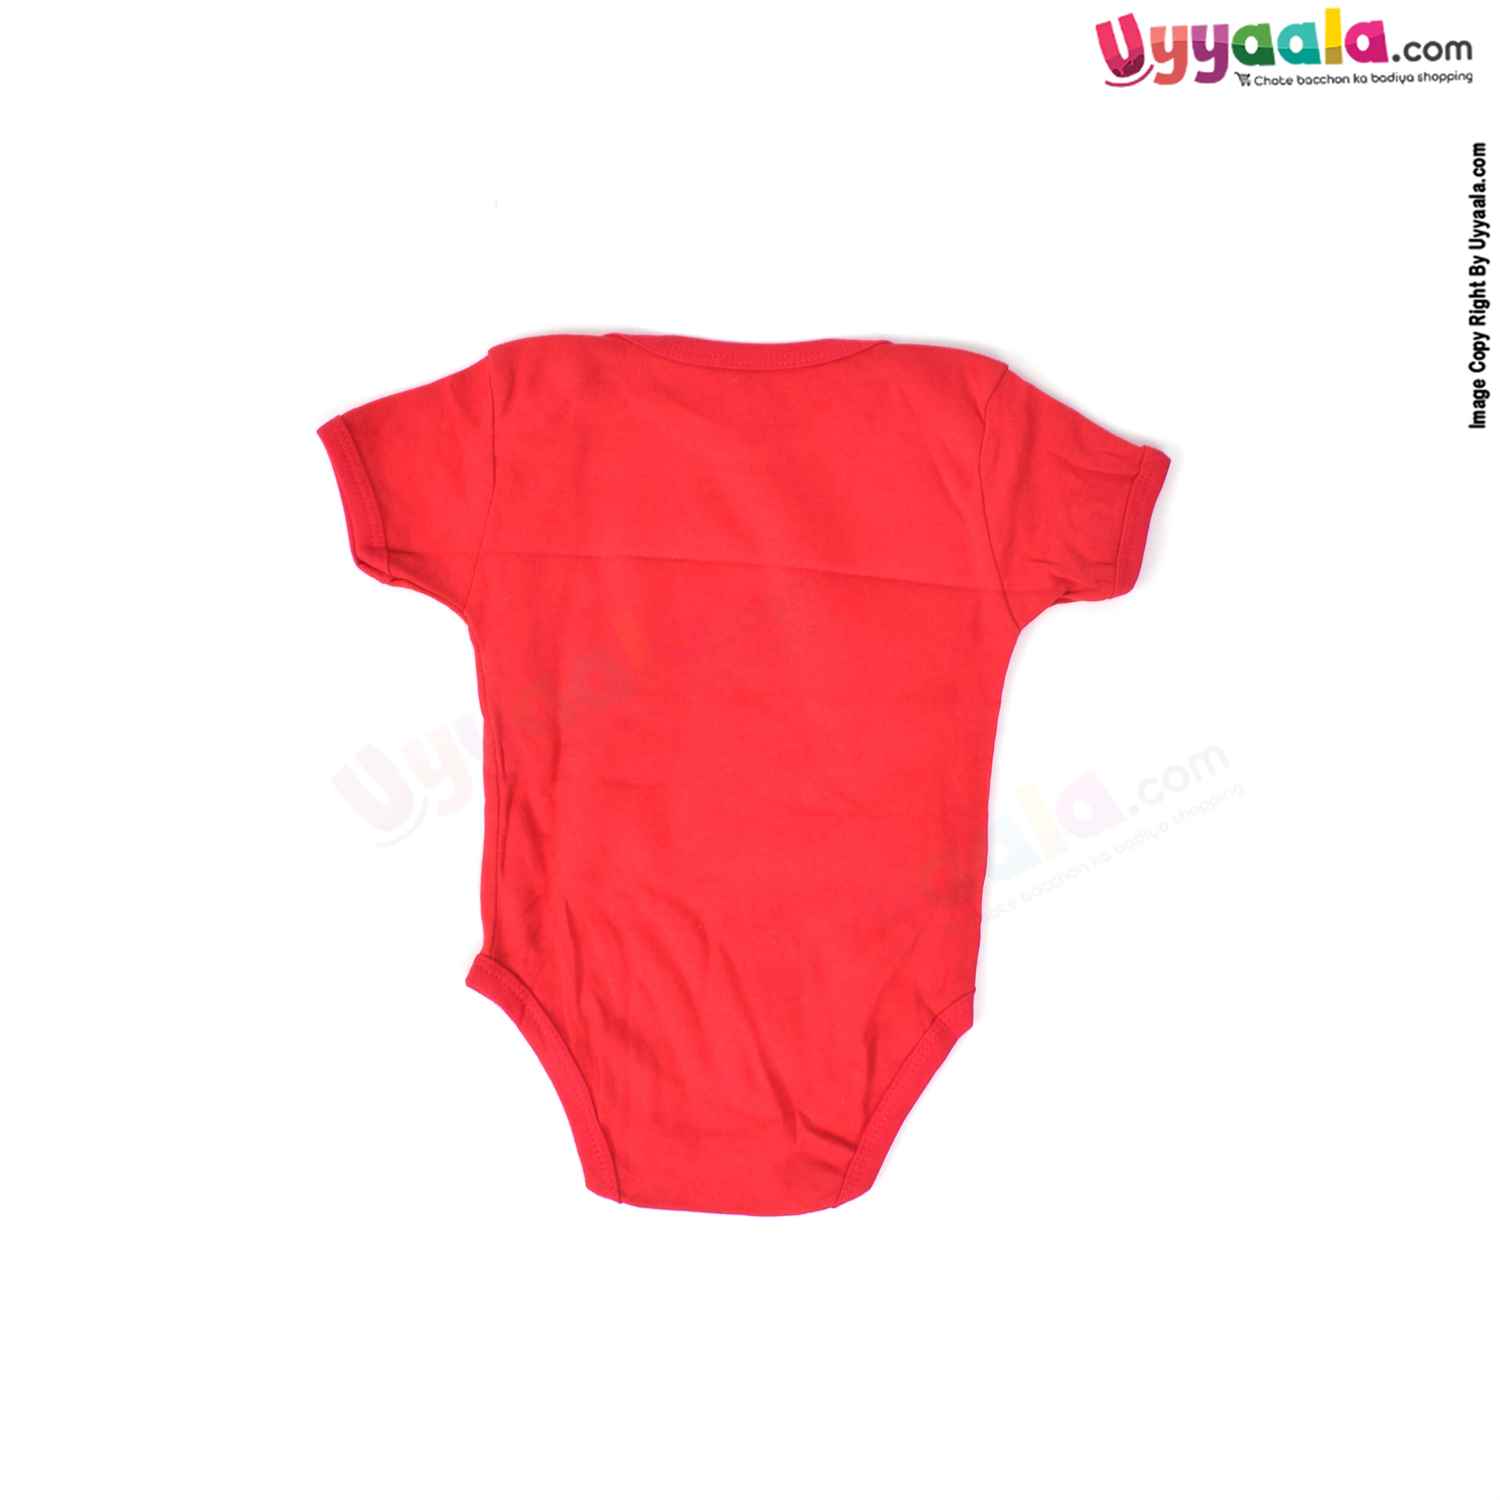 Precious One Short Sleeve Body Suit 100% Soft Hosiery Cotton - Red with Lion Print (9-12M)